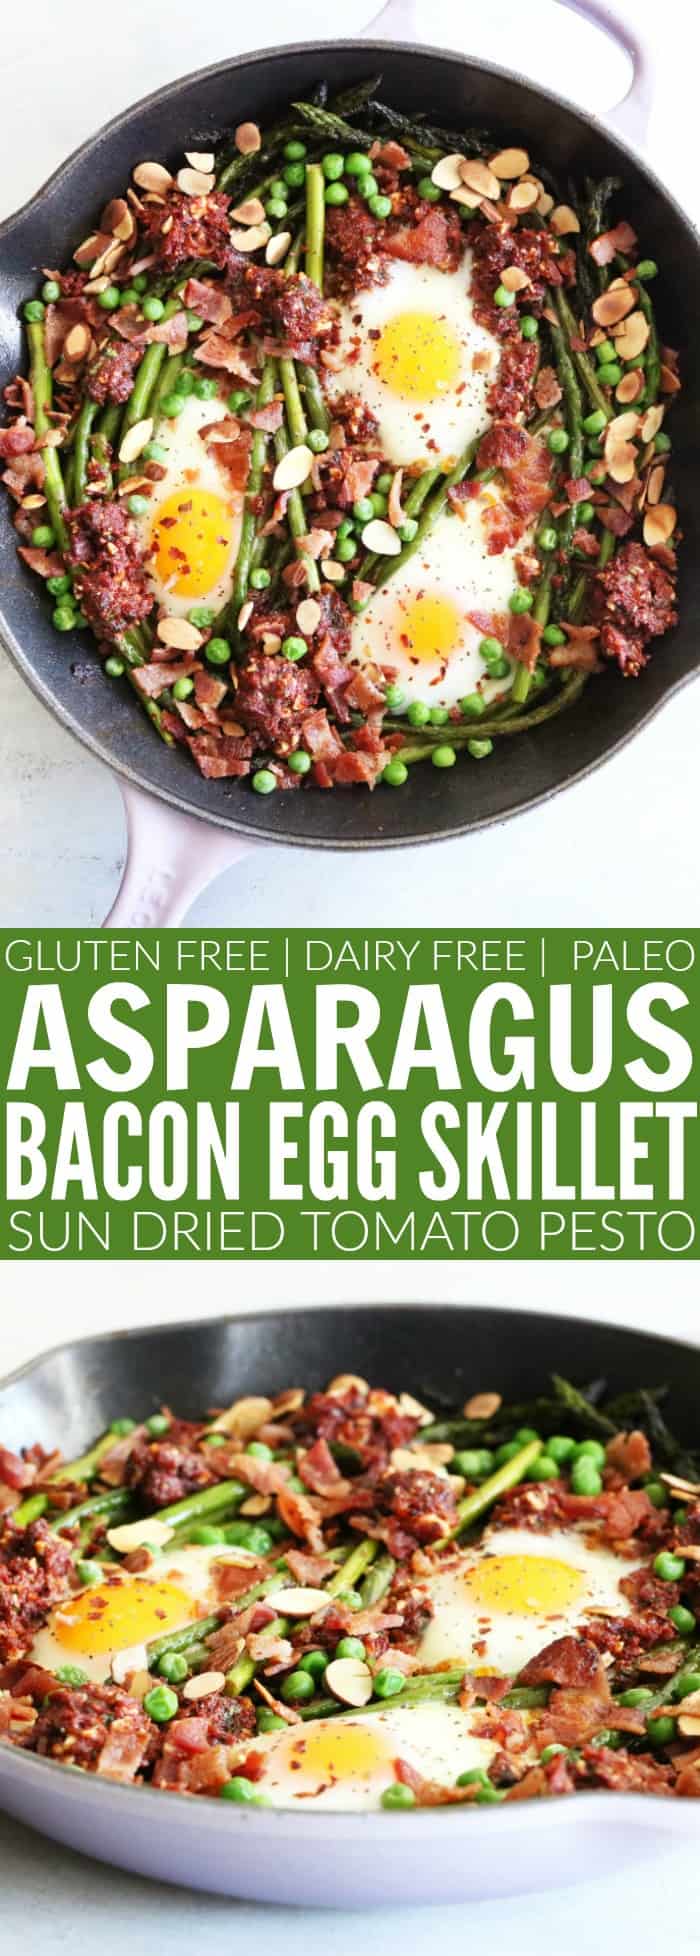 I hope you guys love this Asparagus + Egg Breakfast Skillet!! Loaded with tons of fun flavors, is gluten free, dairy free, paleo, and perfect for your next brunch!! thetoastedpinenut.com #glutenfree #dairyfree #paleo #breakfast #skillet #bacon #eggs #onepan #oneskillet #thetoastedpinenut